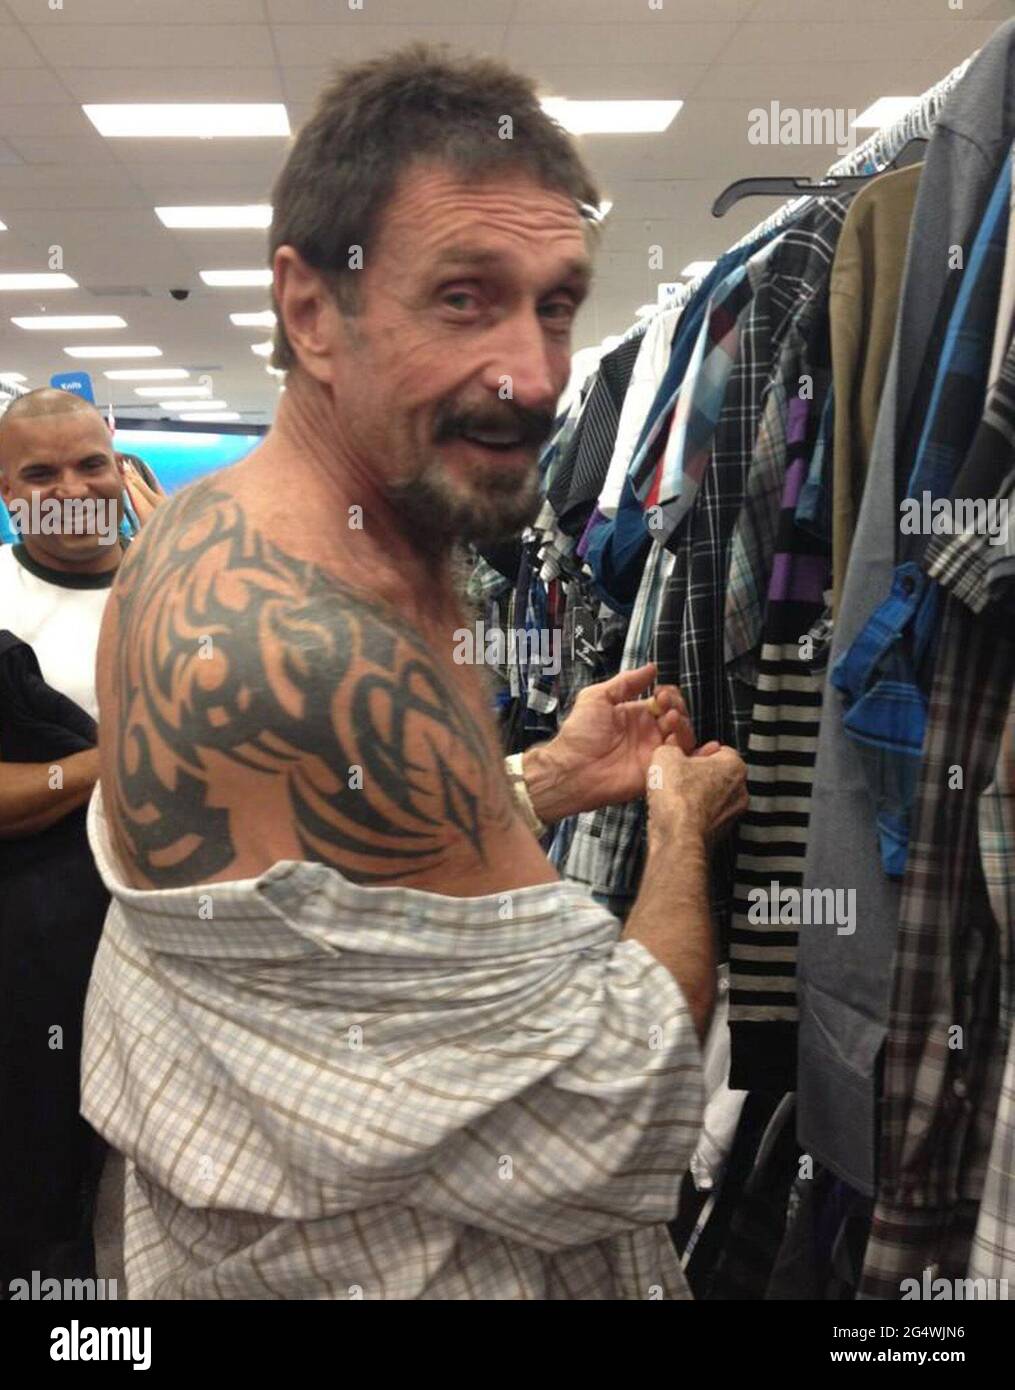 Miami, USA. 13th Dec, 2012. John McAfee shows off his tatoo while shopping in South Beach, Miami, on Thursday, December 13, 2012. John McAfee, the controversial guru of computer anti-virus software, denied Thursday in Miami Beach that he's been interviewed by Internal Revenue Service and FBI agents after arriving the previous night following deportation from Guatemala. (Photo by Anna Edgerton/Miami Herald/MCT/Sipa USA) Credit: Sipa USA/Alamy Live News Stock Photo